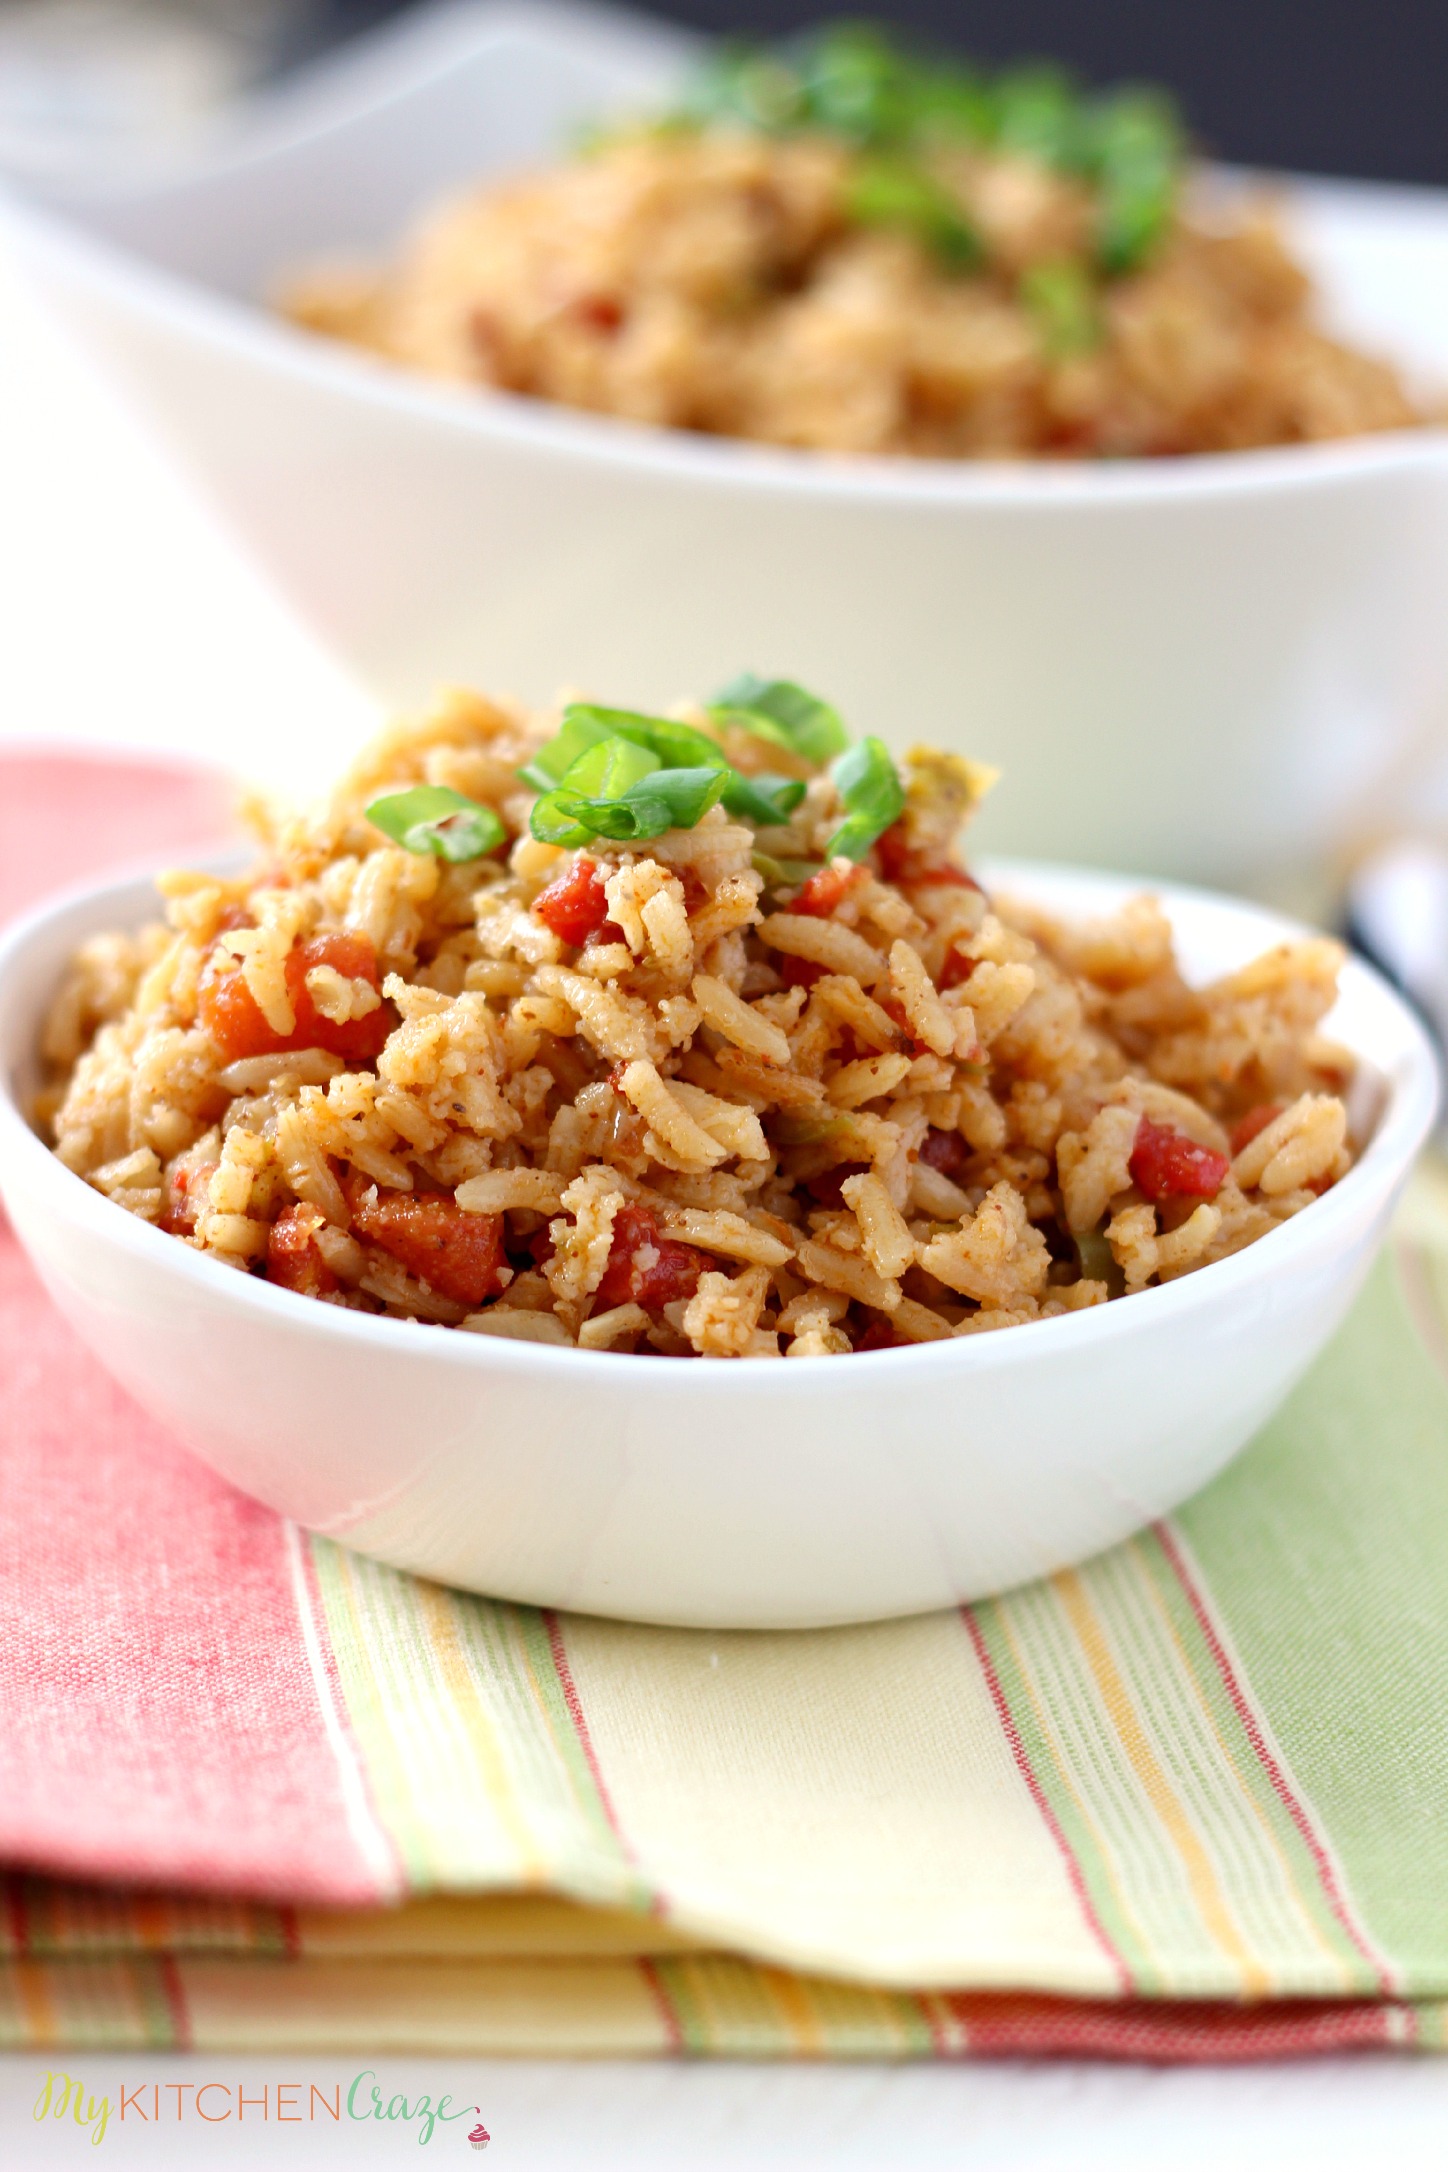 Spanish Rice ~ www.mykitchencraze.com~ This Spanish Rice is quick, easy and delicious!